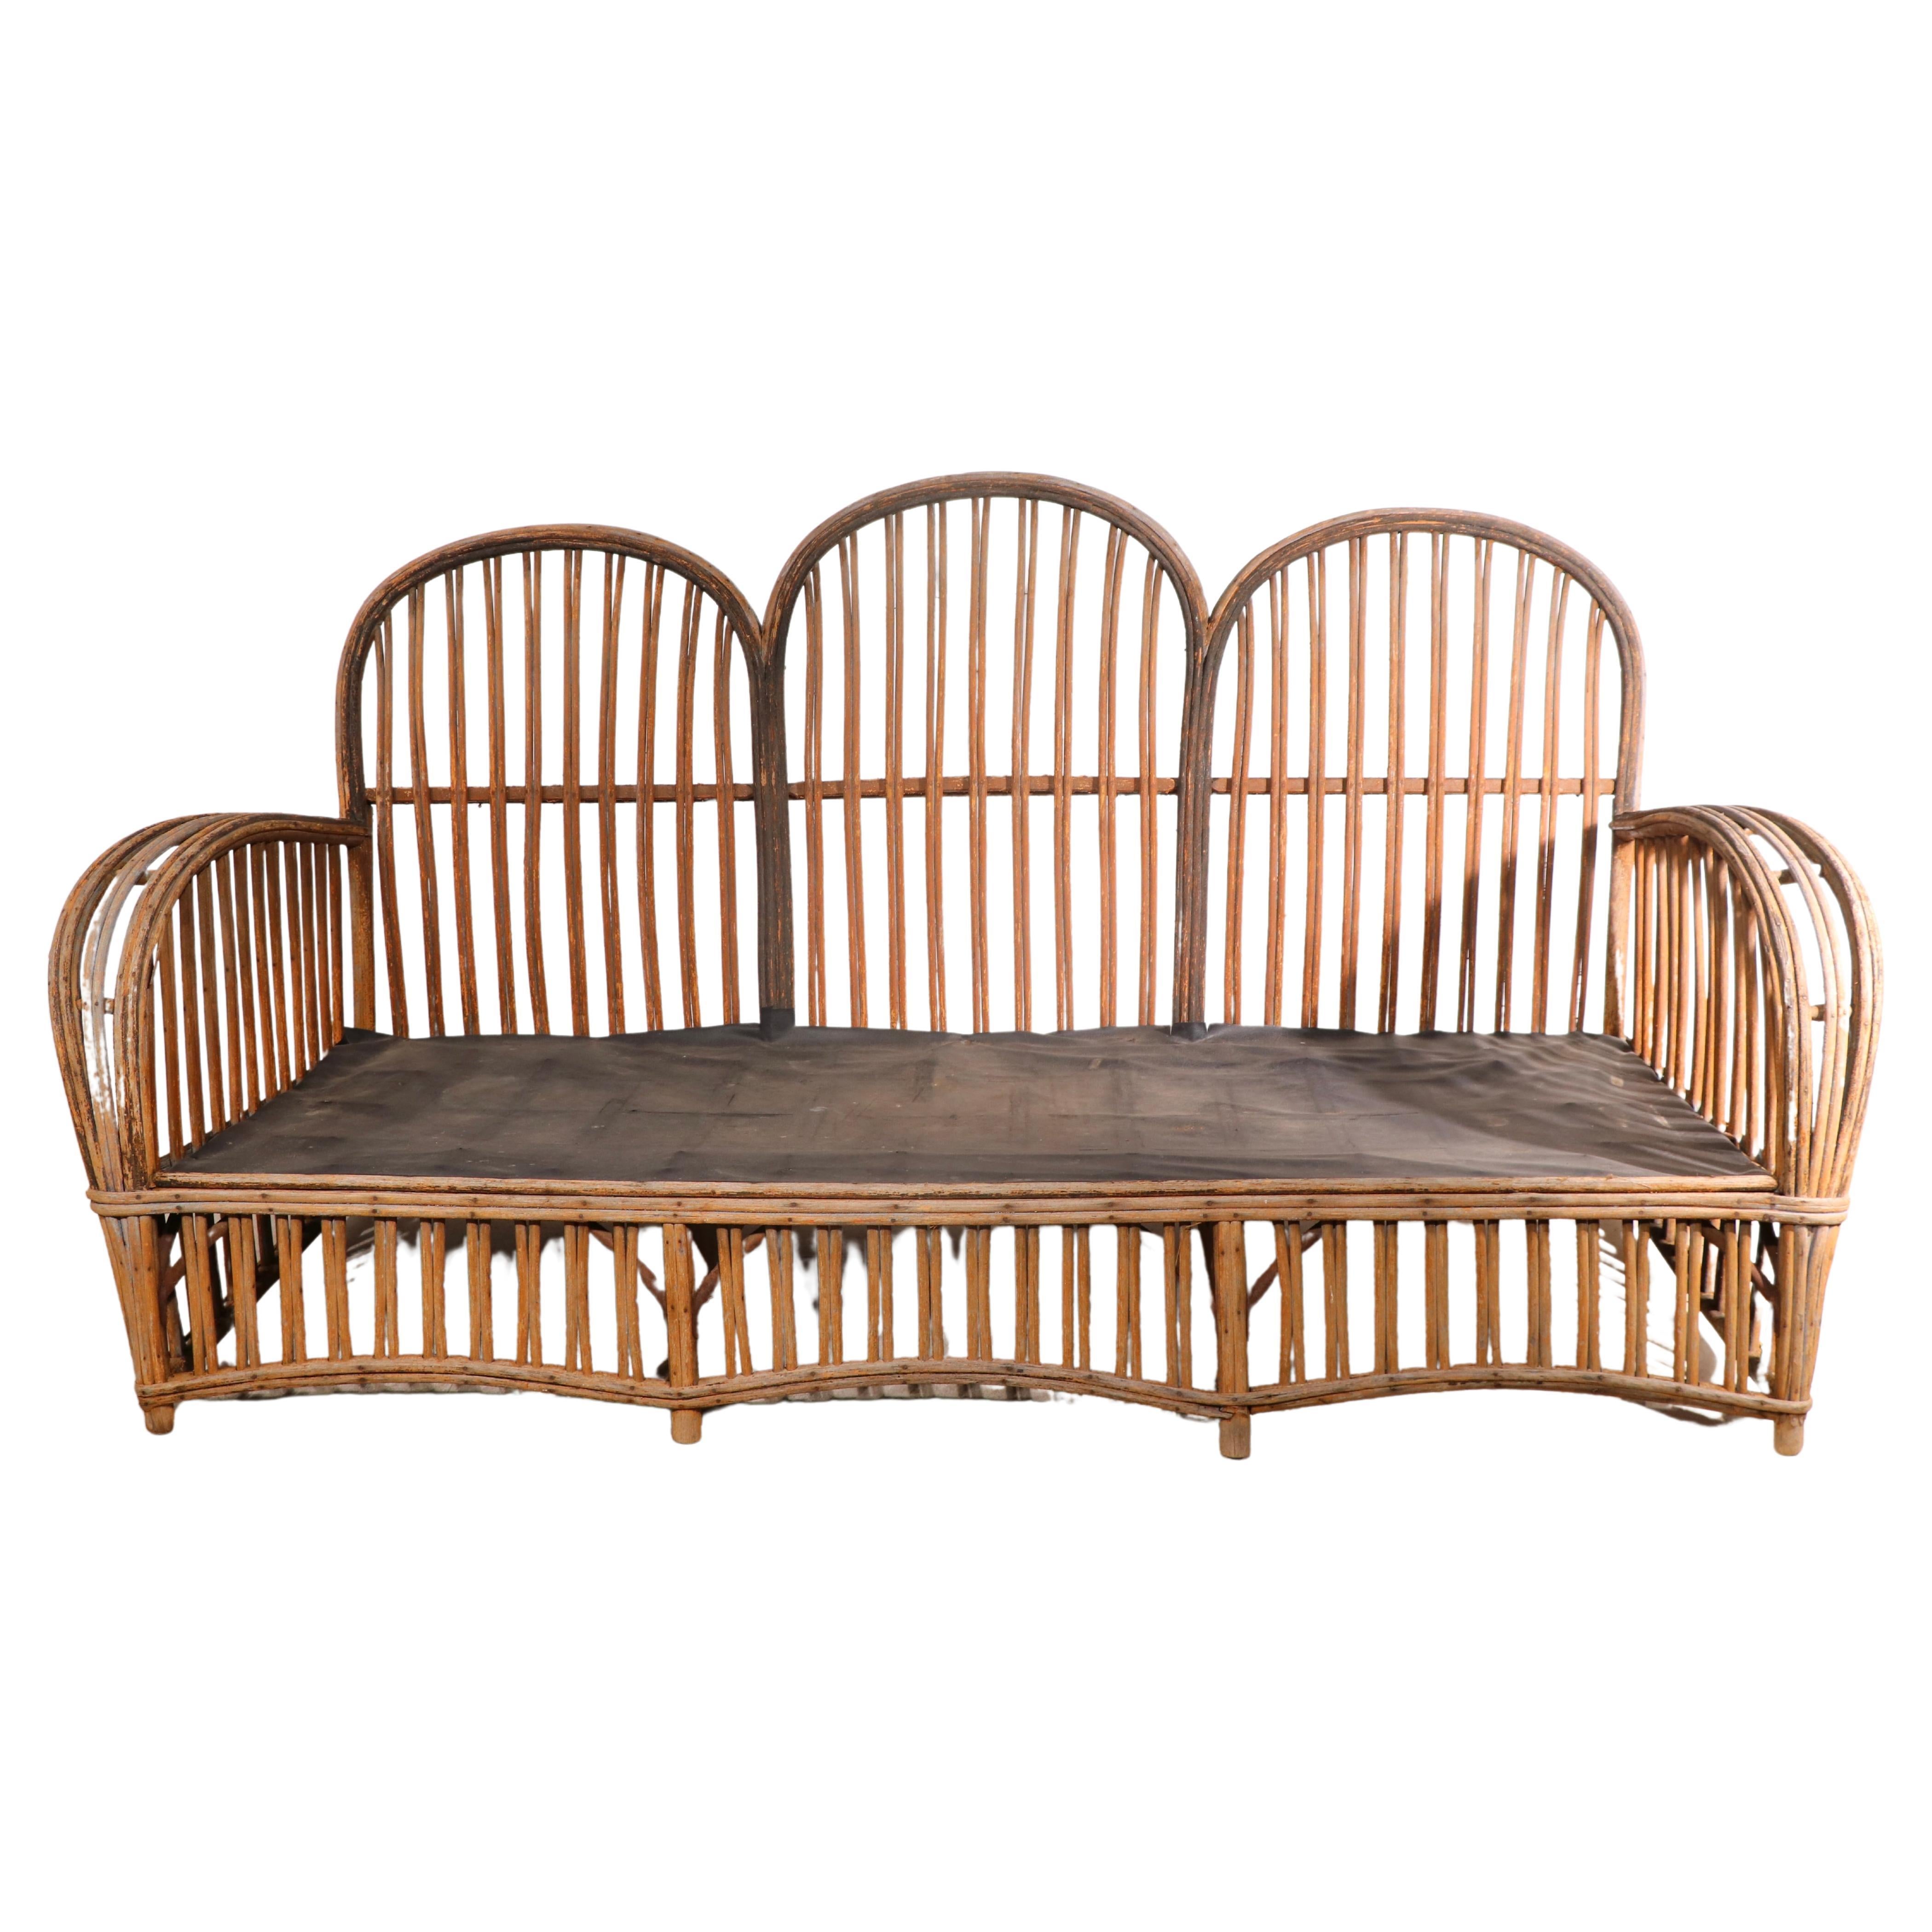 Stylish Art Deco period sofa, constructed of split reed, stick wicker. This example is structurally sound and sturdy, the finish shows significant weathering, there is some minor loss to trim wrapping, the cushions are not included. 
Total H 36 -